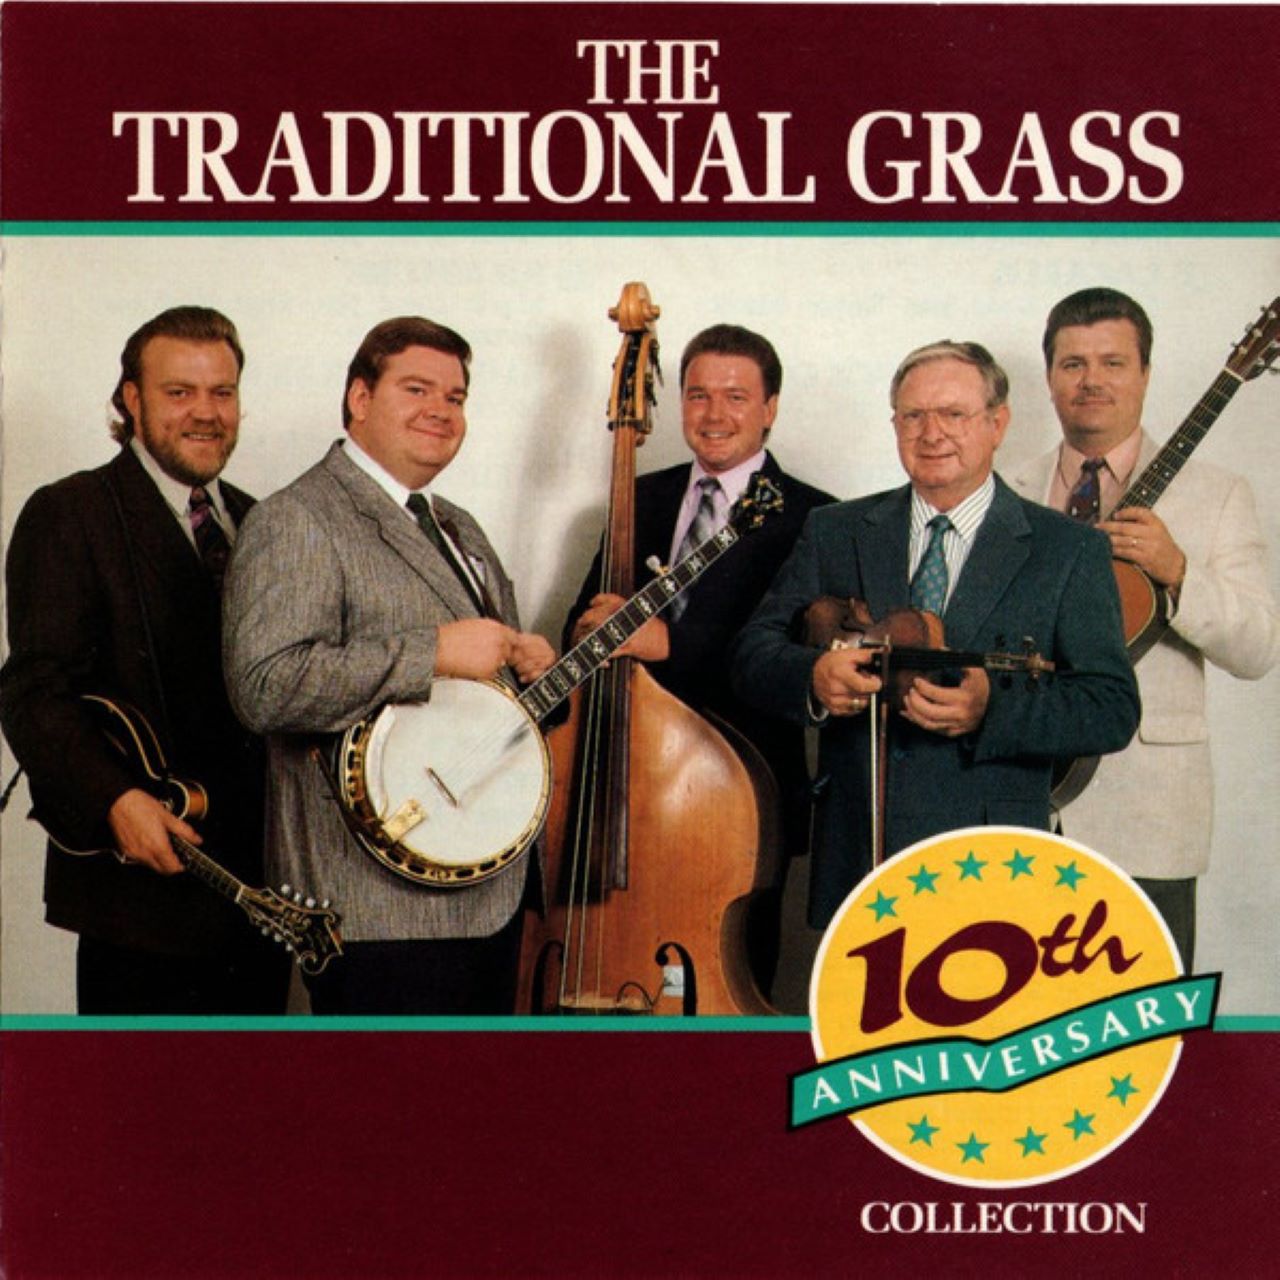 Traditional Grass - 10th Anniversary Collection cover album